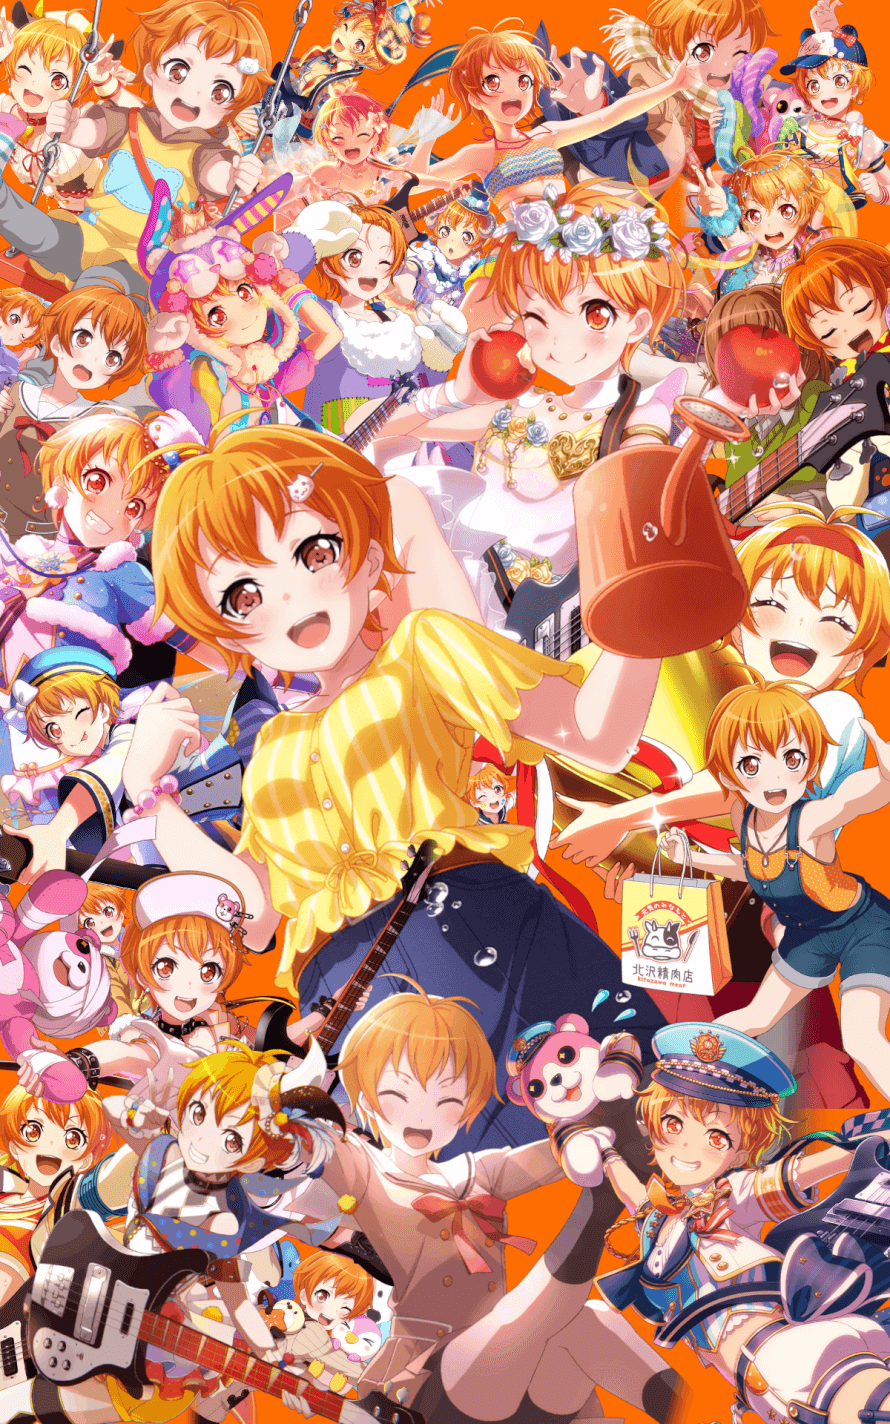   HAPPY HAGUMI A.K.A CROQUETTE GOD DAY